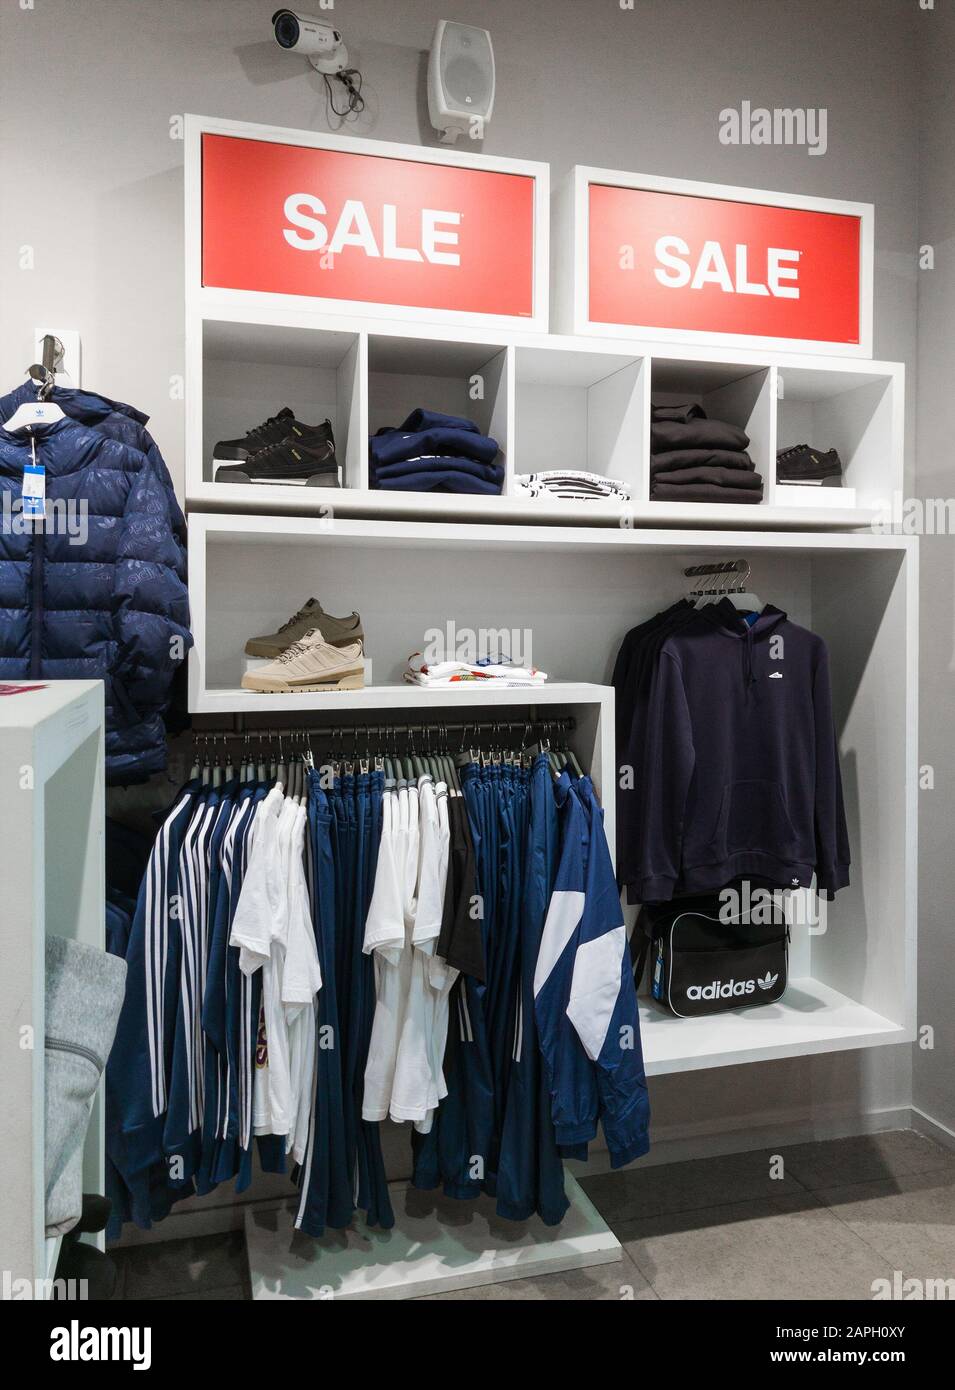 Stores That Sell Adidas Clothing Shop, SAVE 56%.